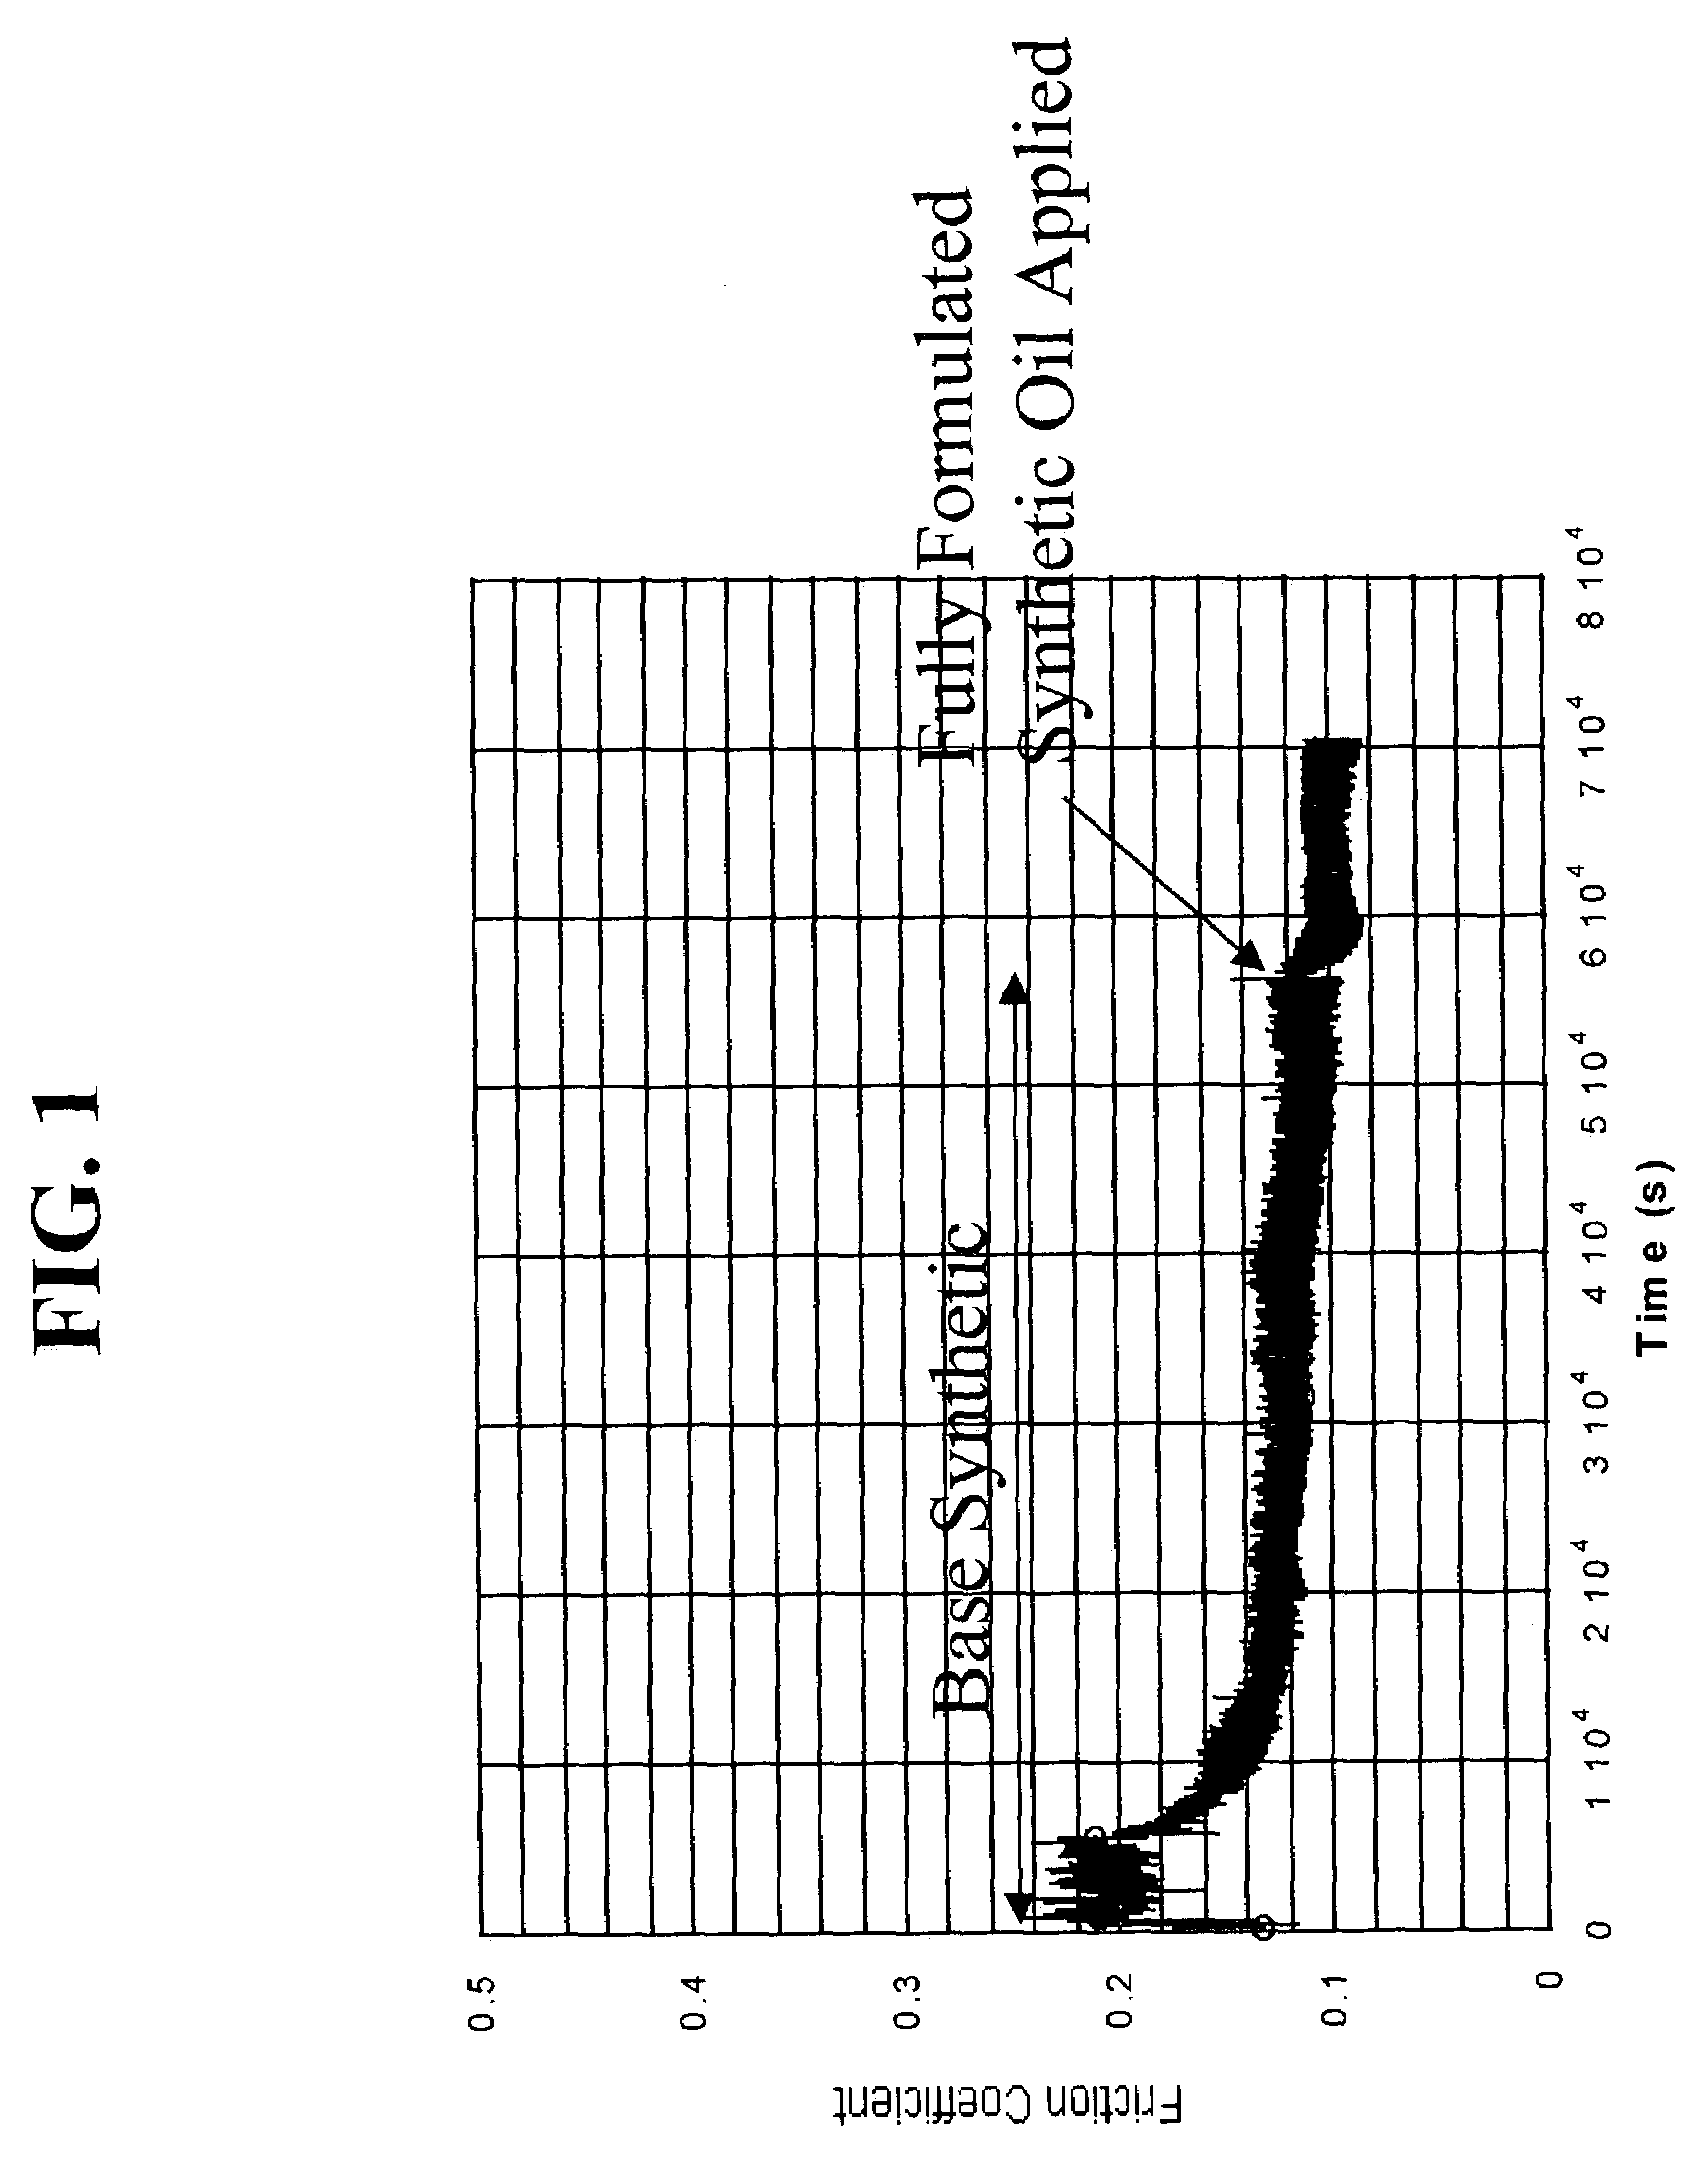 Hard and low friction nitride coatings and methods for forming the same